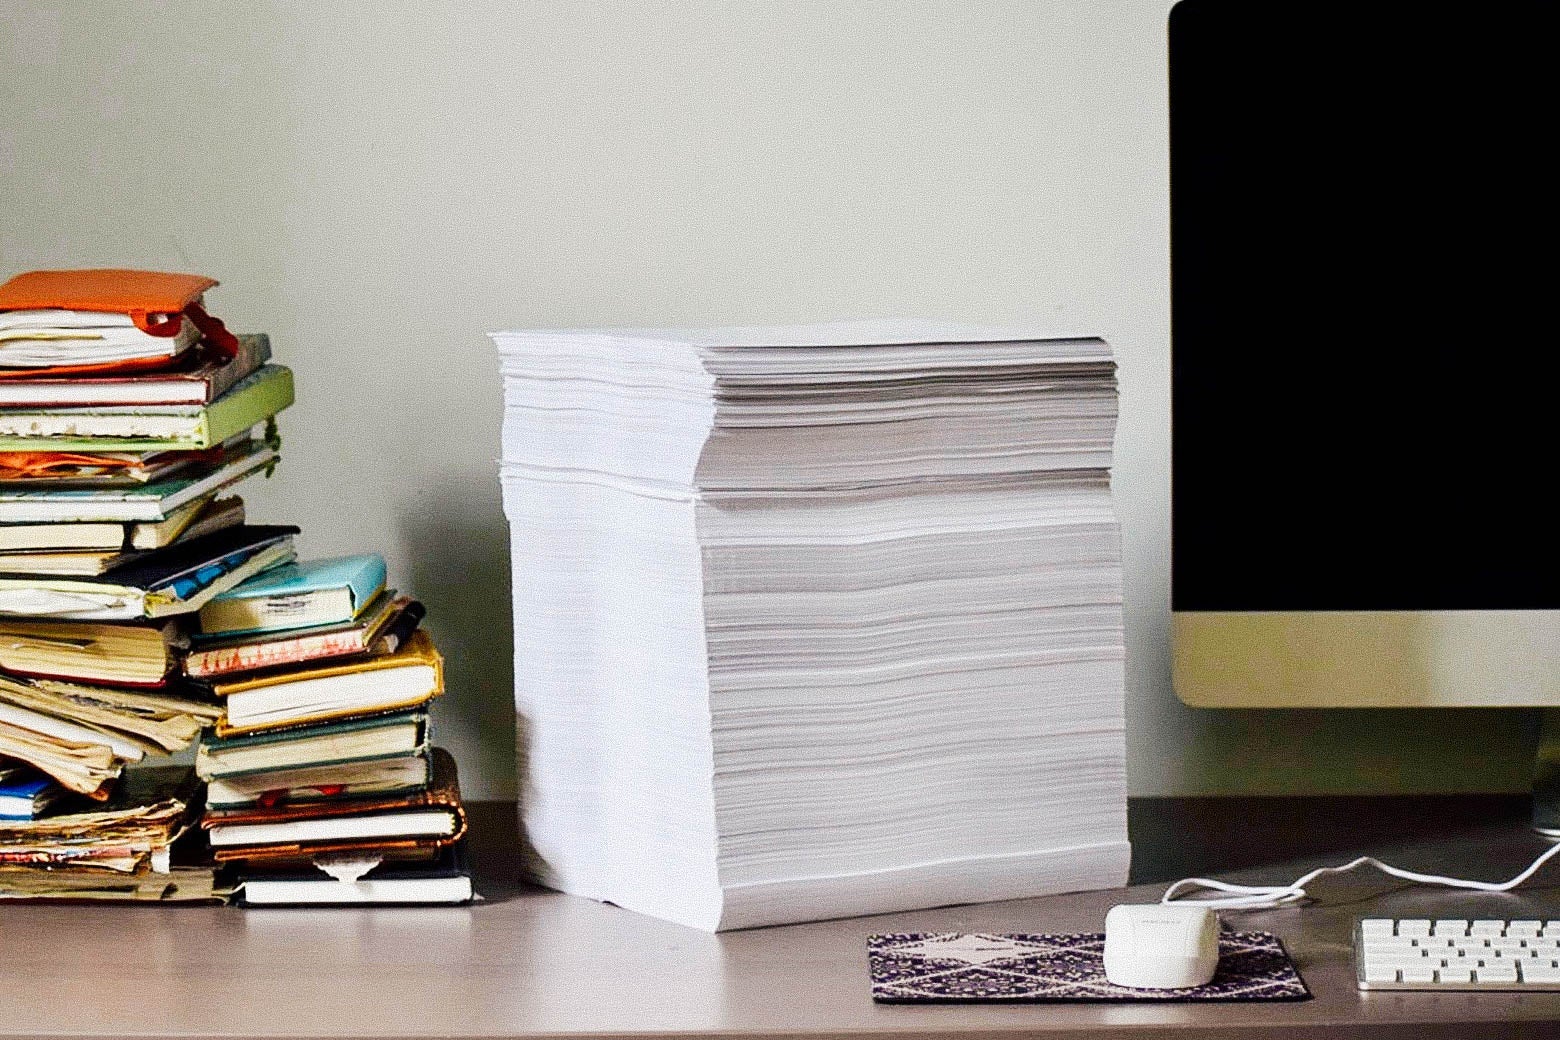 A stack of printed papers on a desk, flanked by a computer and books.